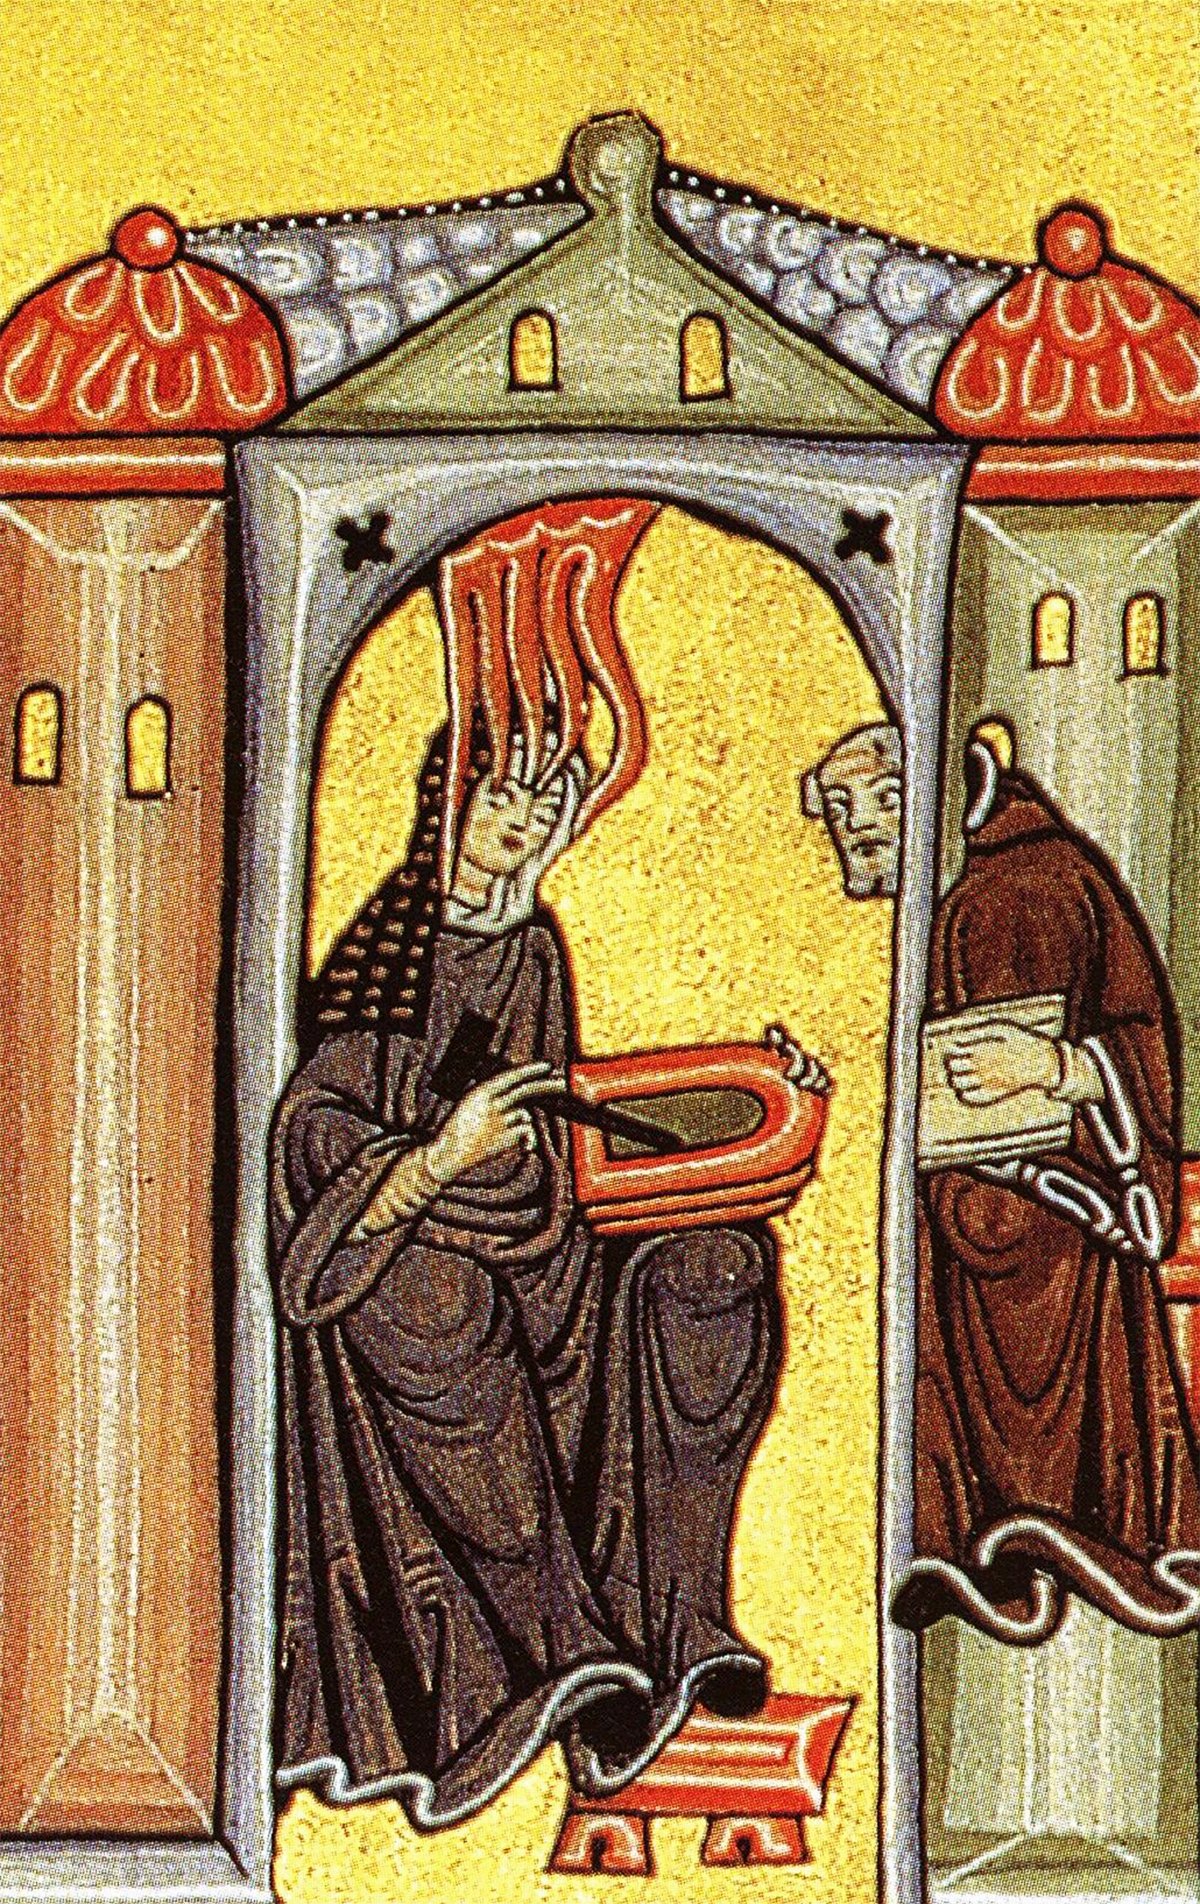 Illumination from Hildegard's Scivias (1151) showing her receiving a vision and dictating to teacher Volmar